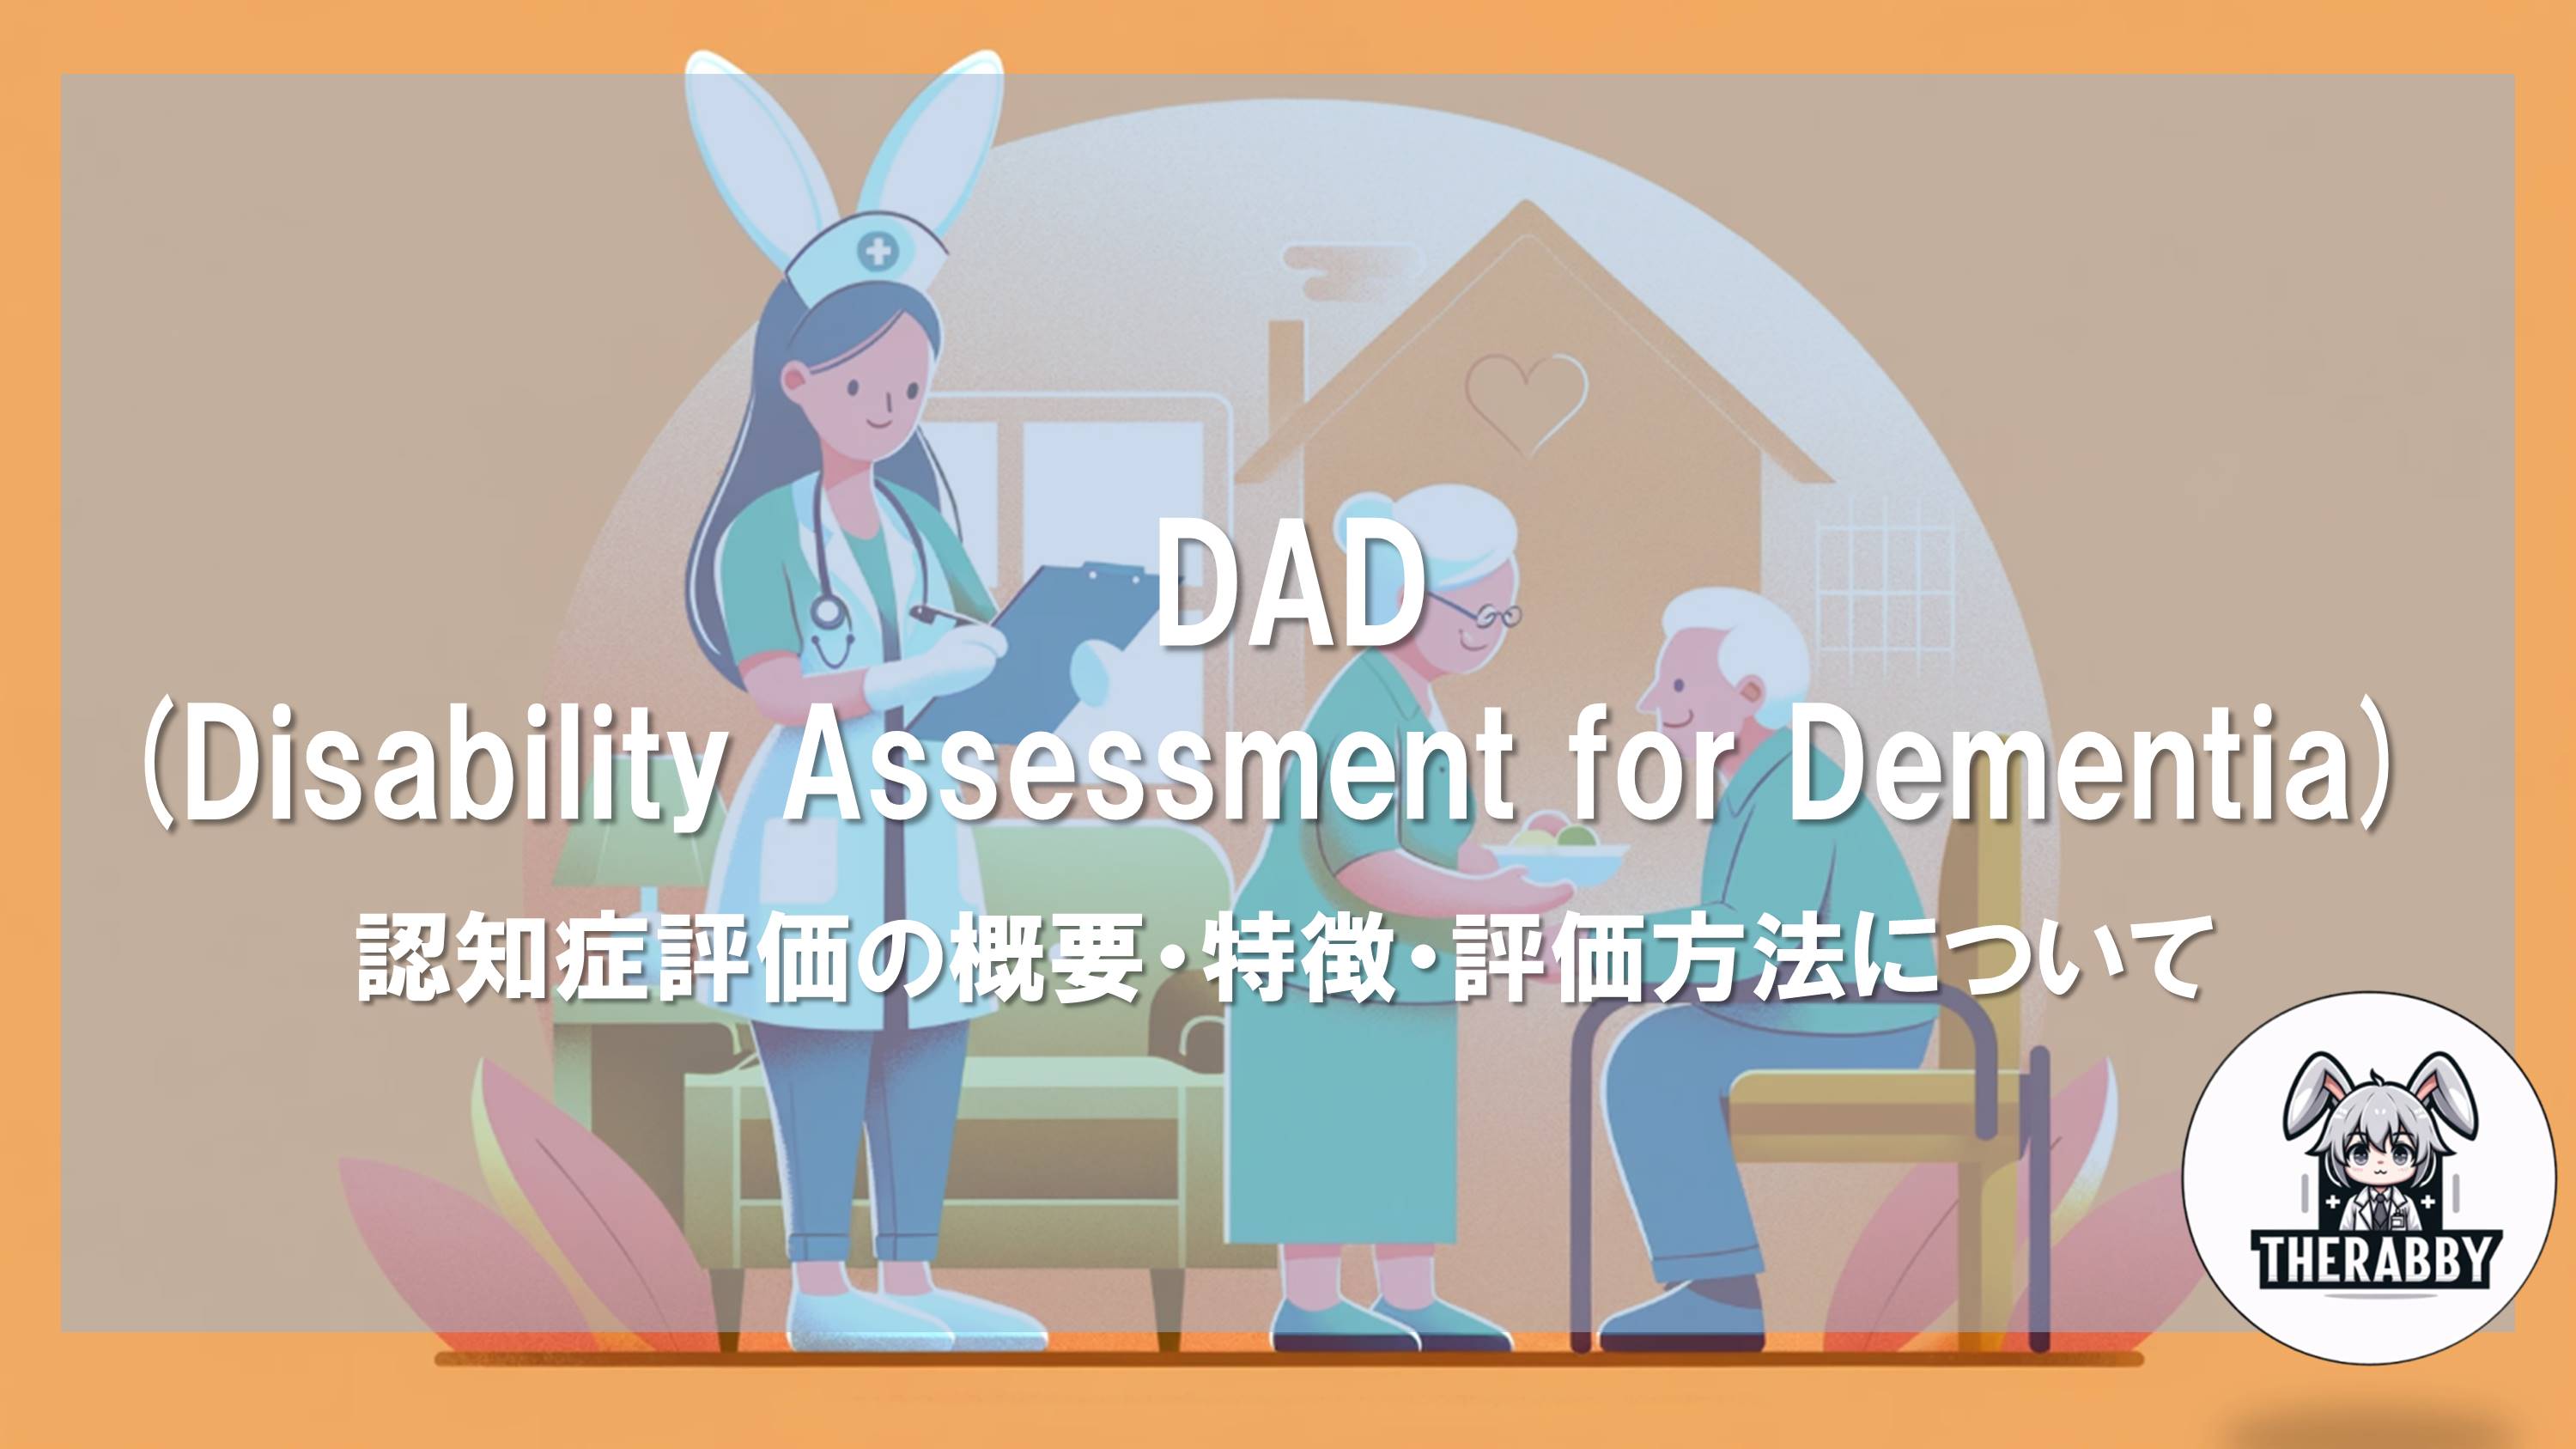 DAD(Disability Assessment for Dementia) - 認知症評価の概要・特徴・評価方法について